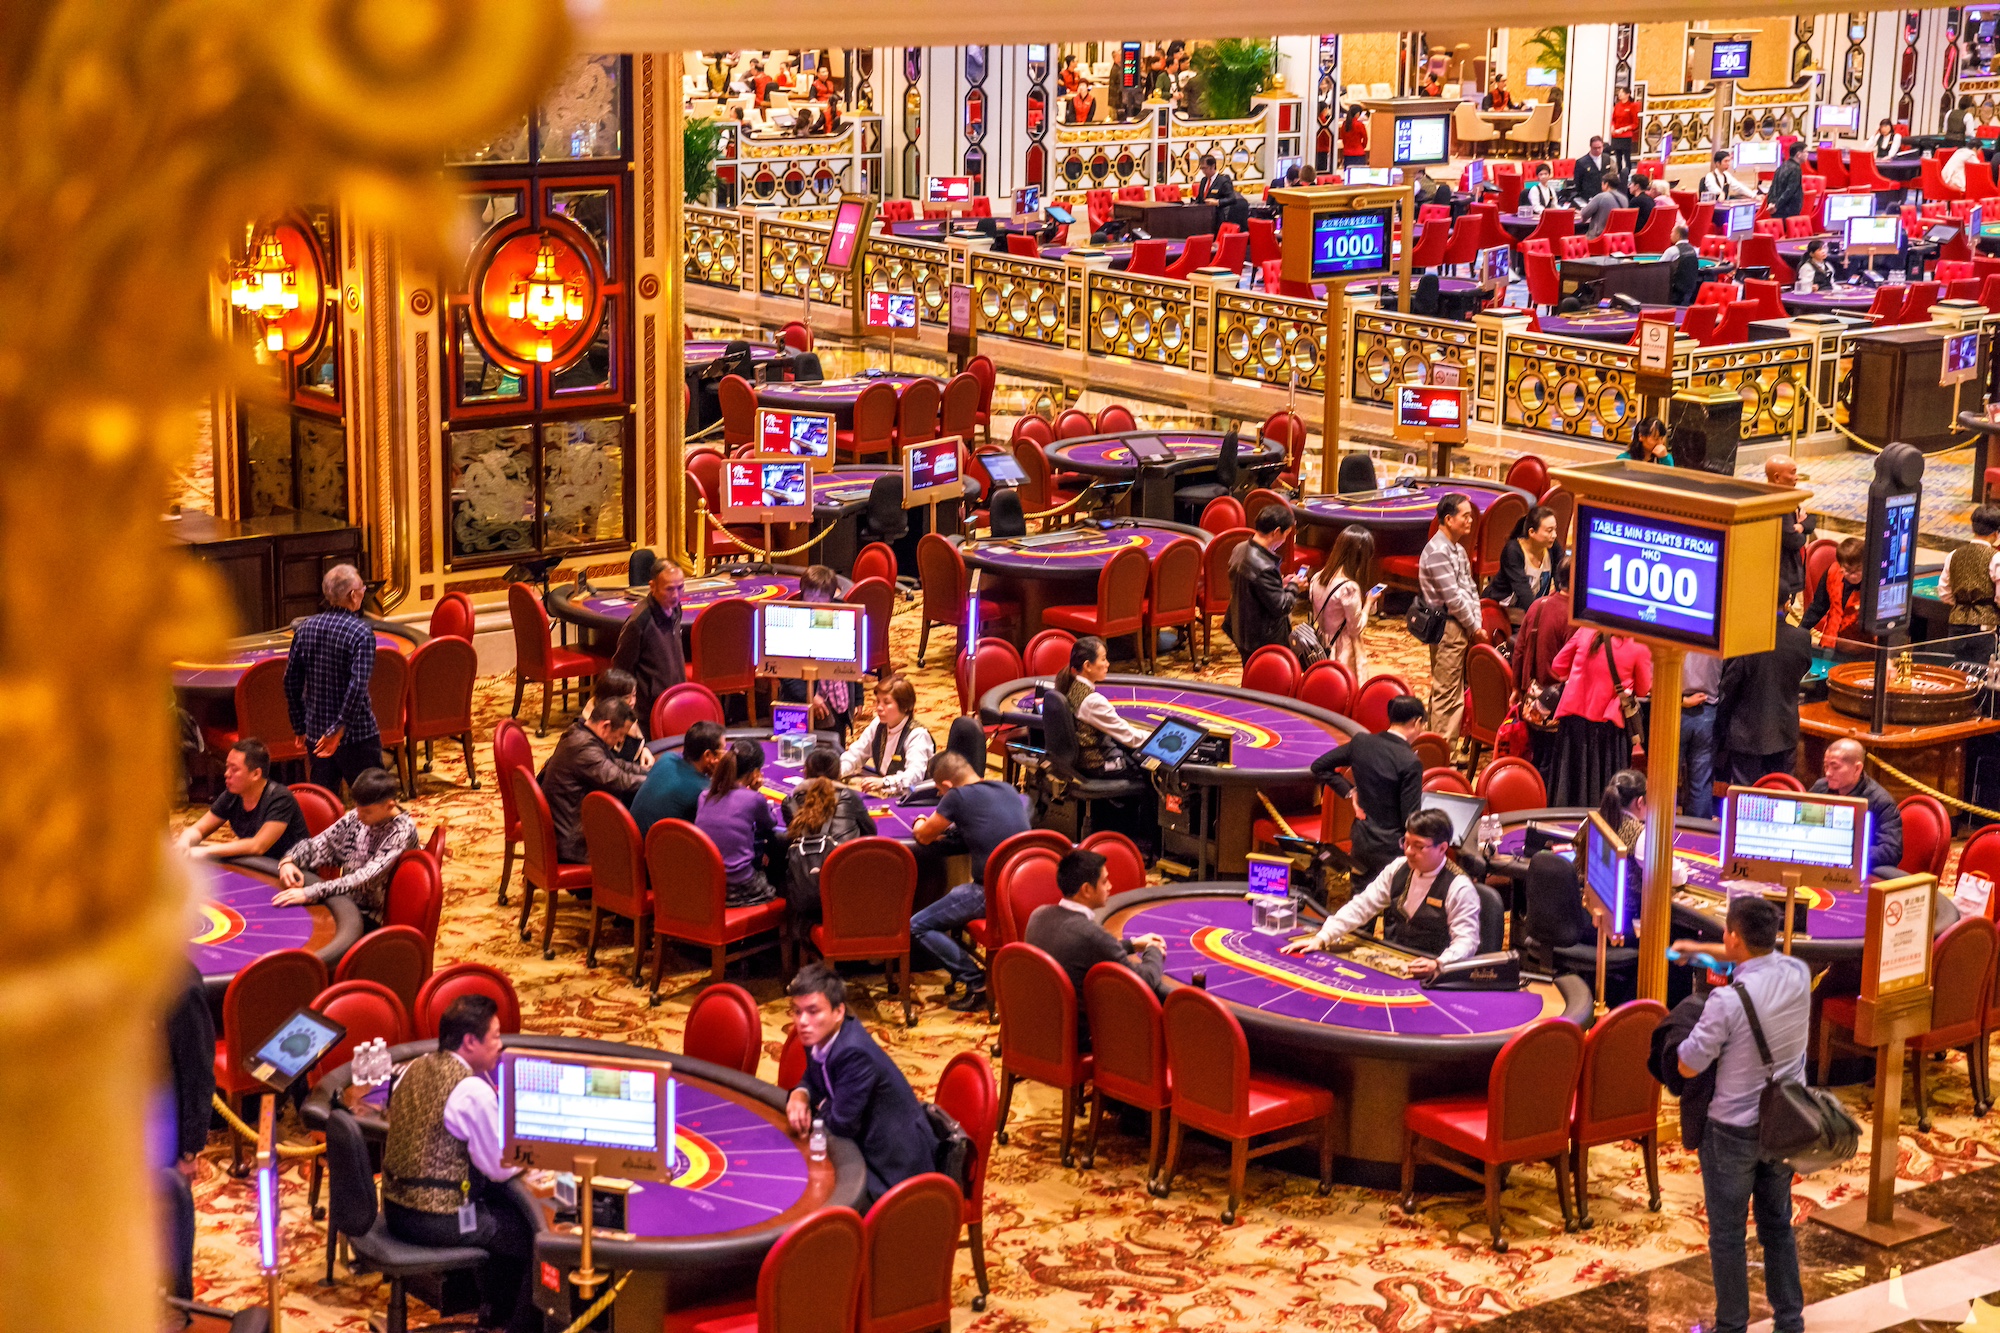 Should casino workers be licensed or accredited?